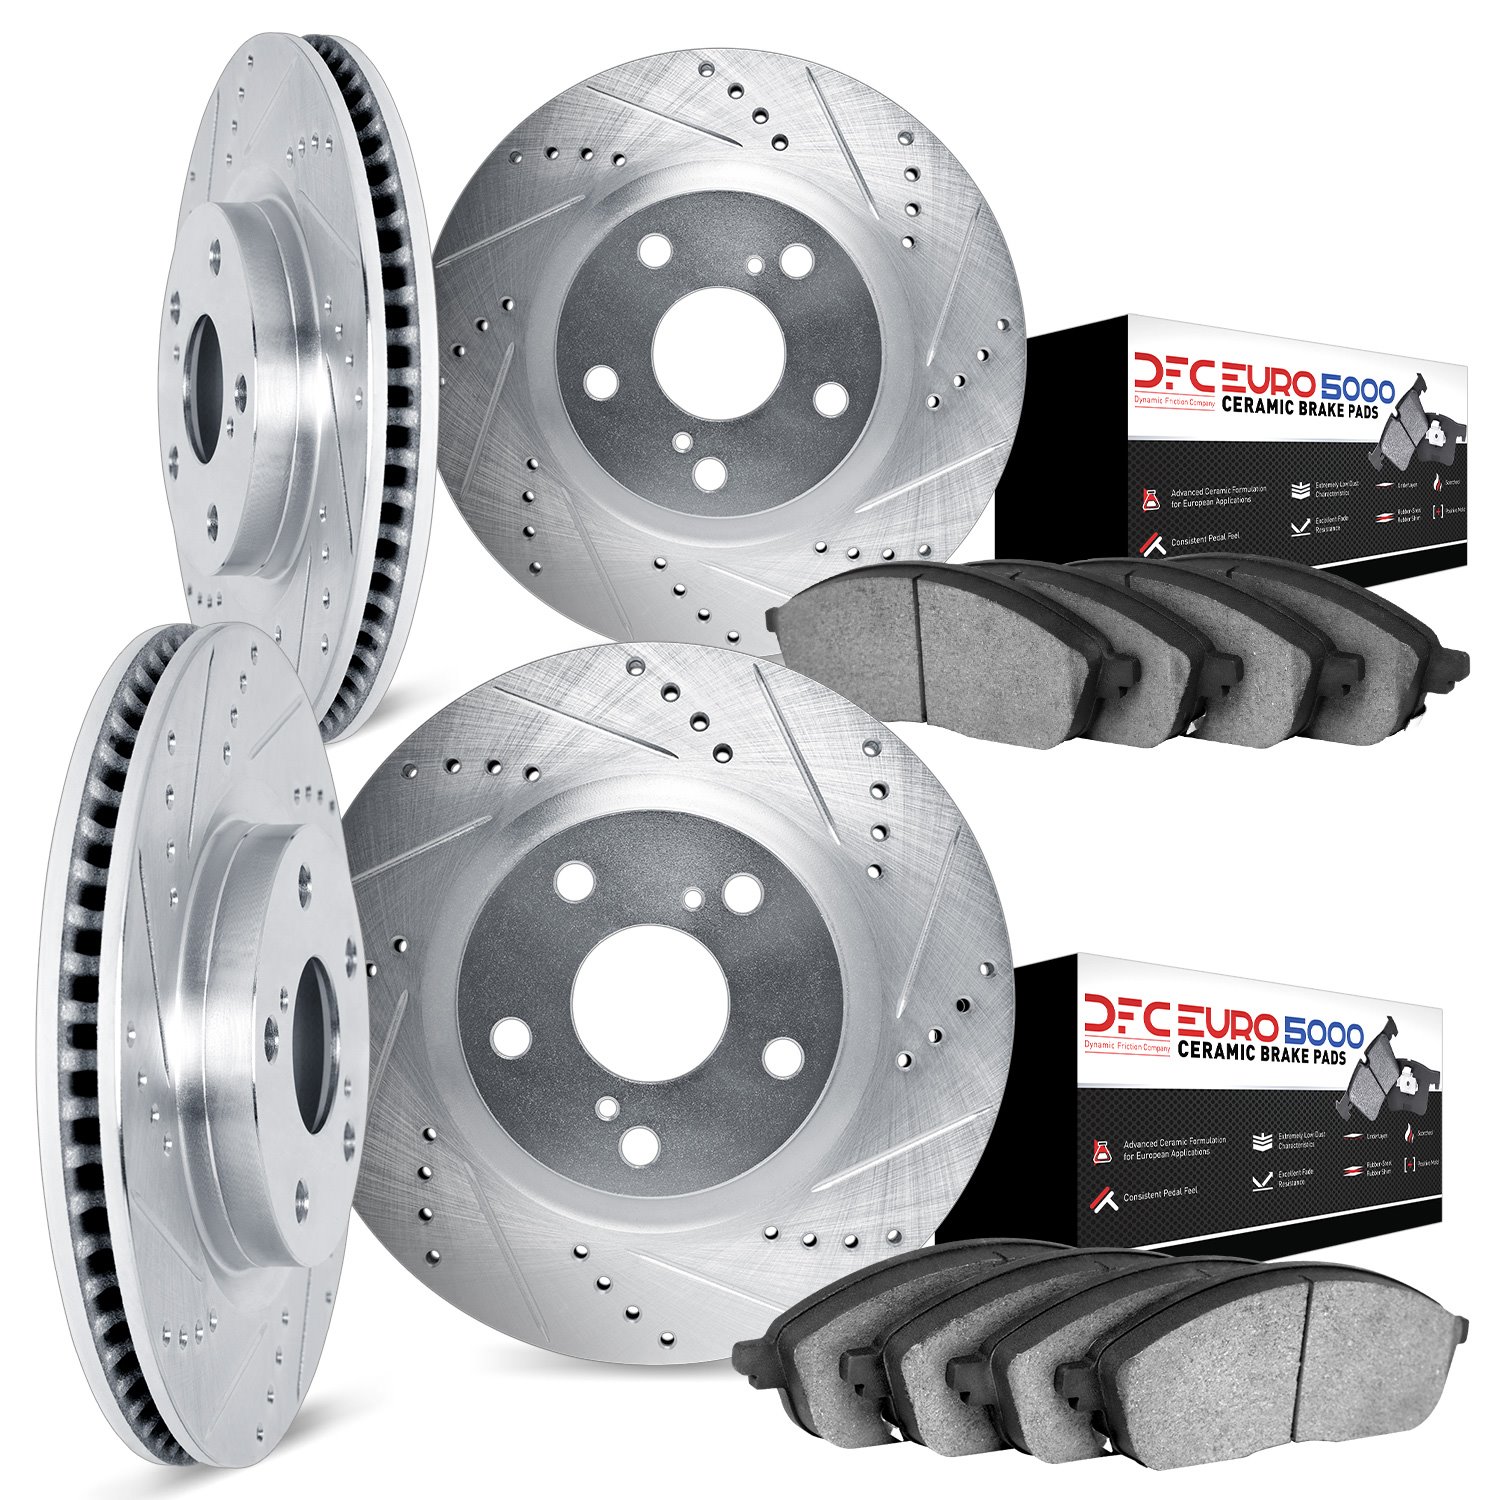 7604-31031 Drilled/Slotted Brake Rotors w/5000 Euro Ceramic Brake Pads Kit [Silver], Fits Select BMW, Position: Front and Rear